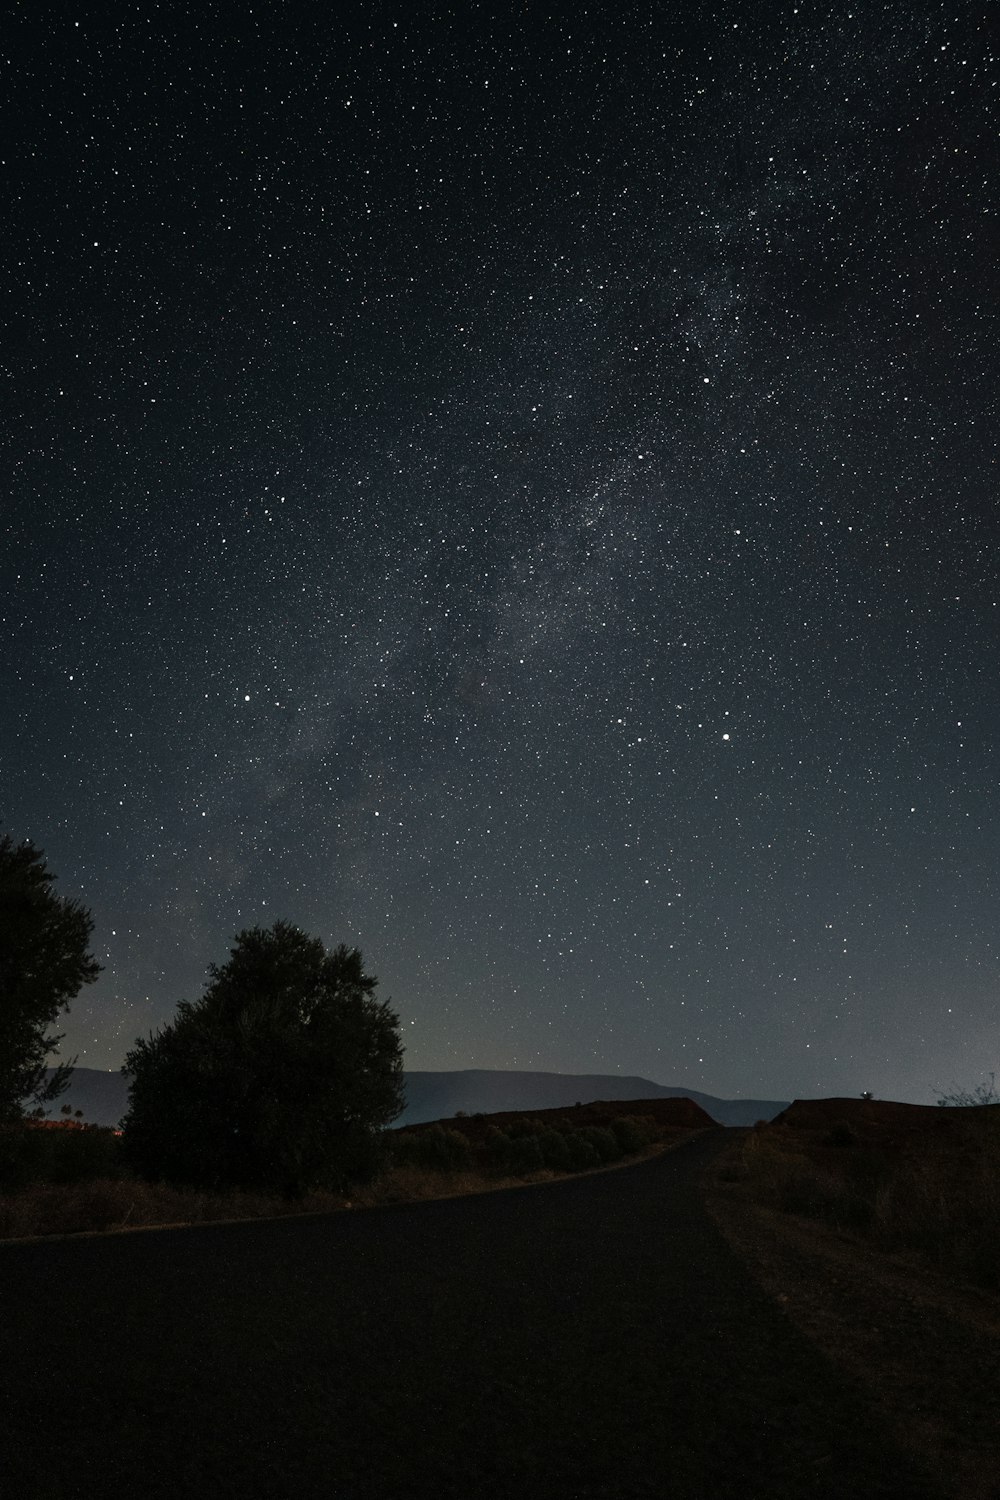 the night sky with stars above a road